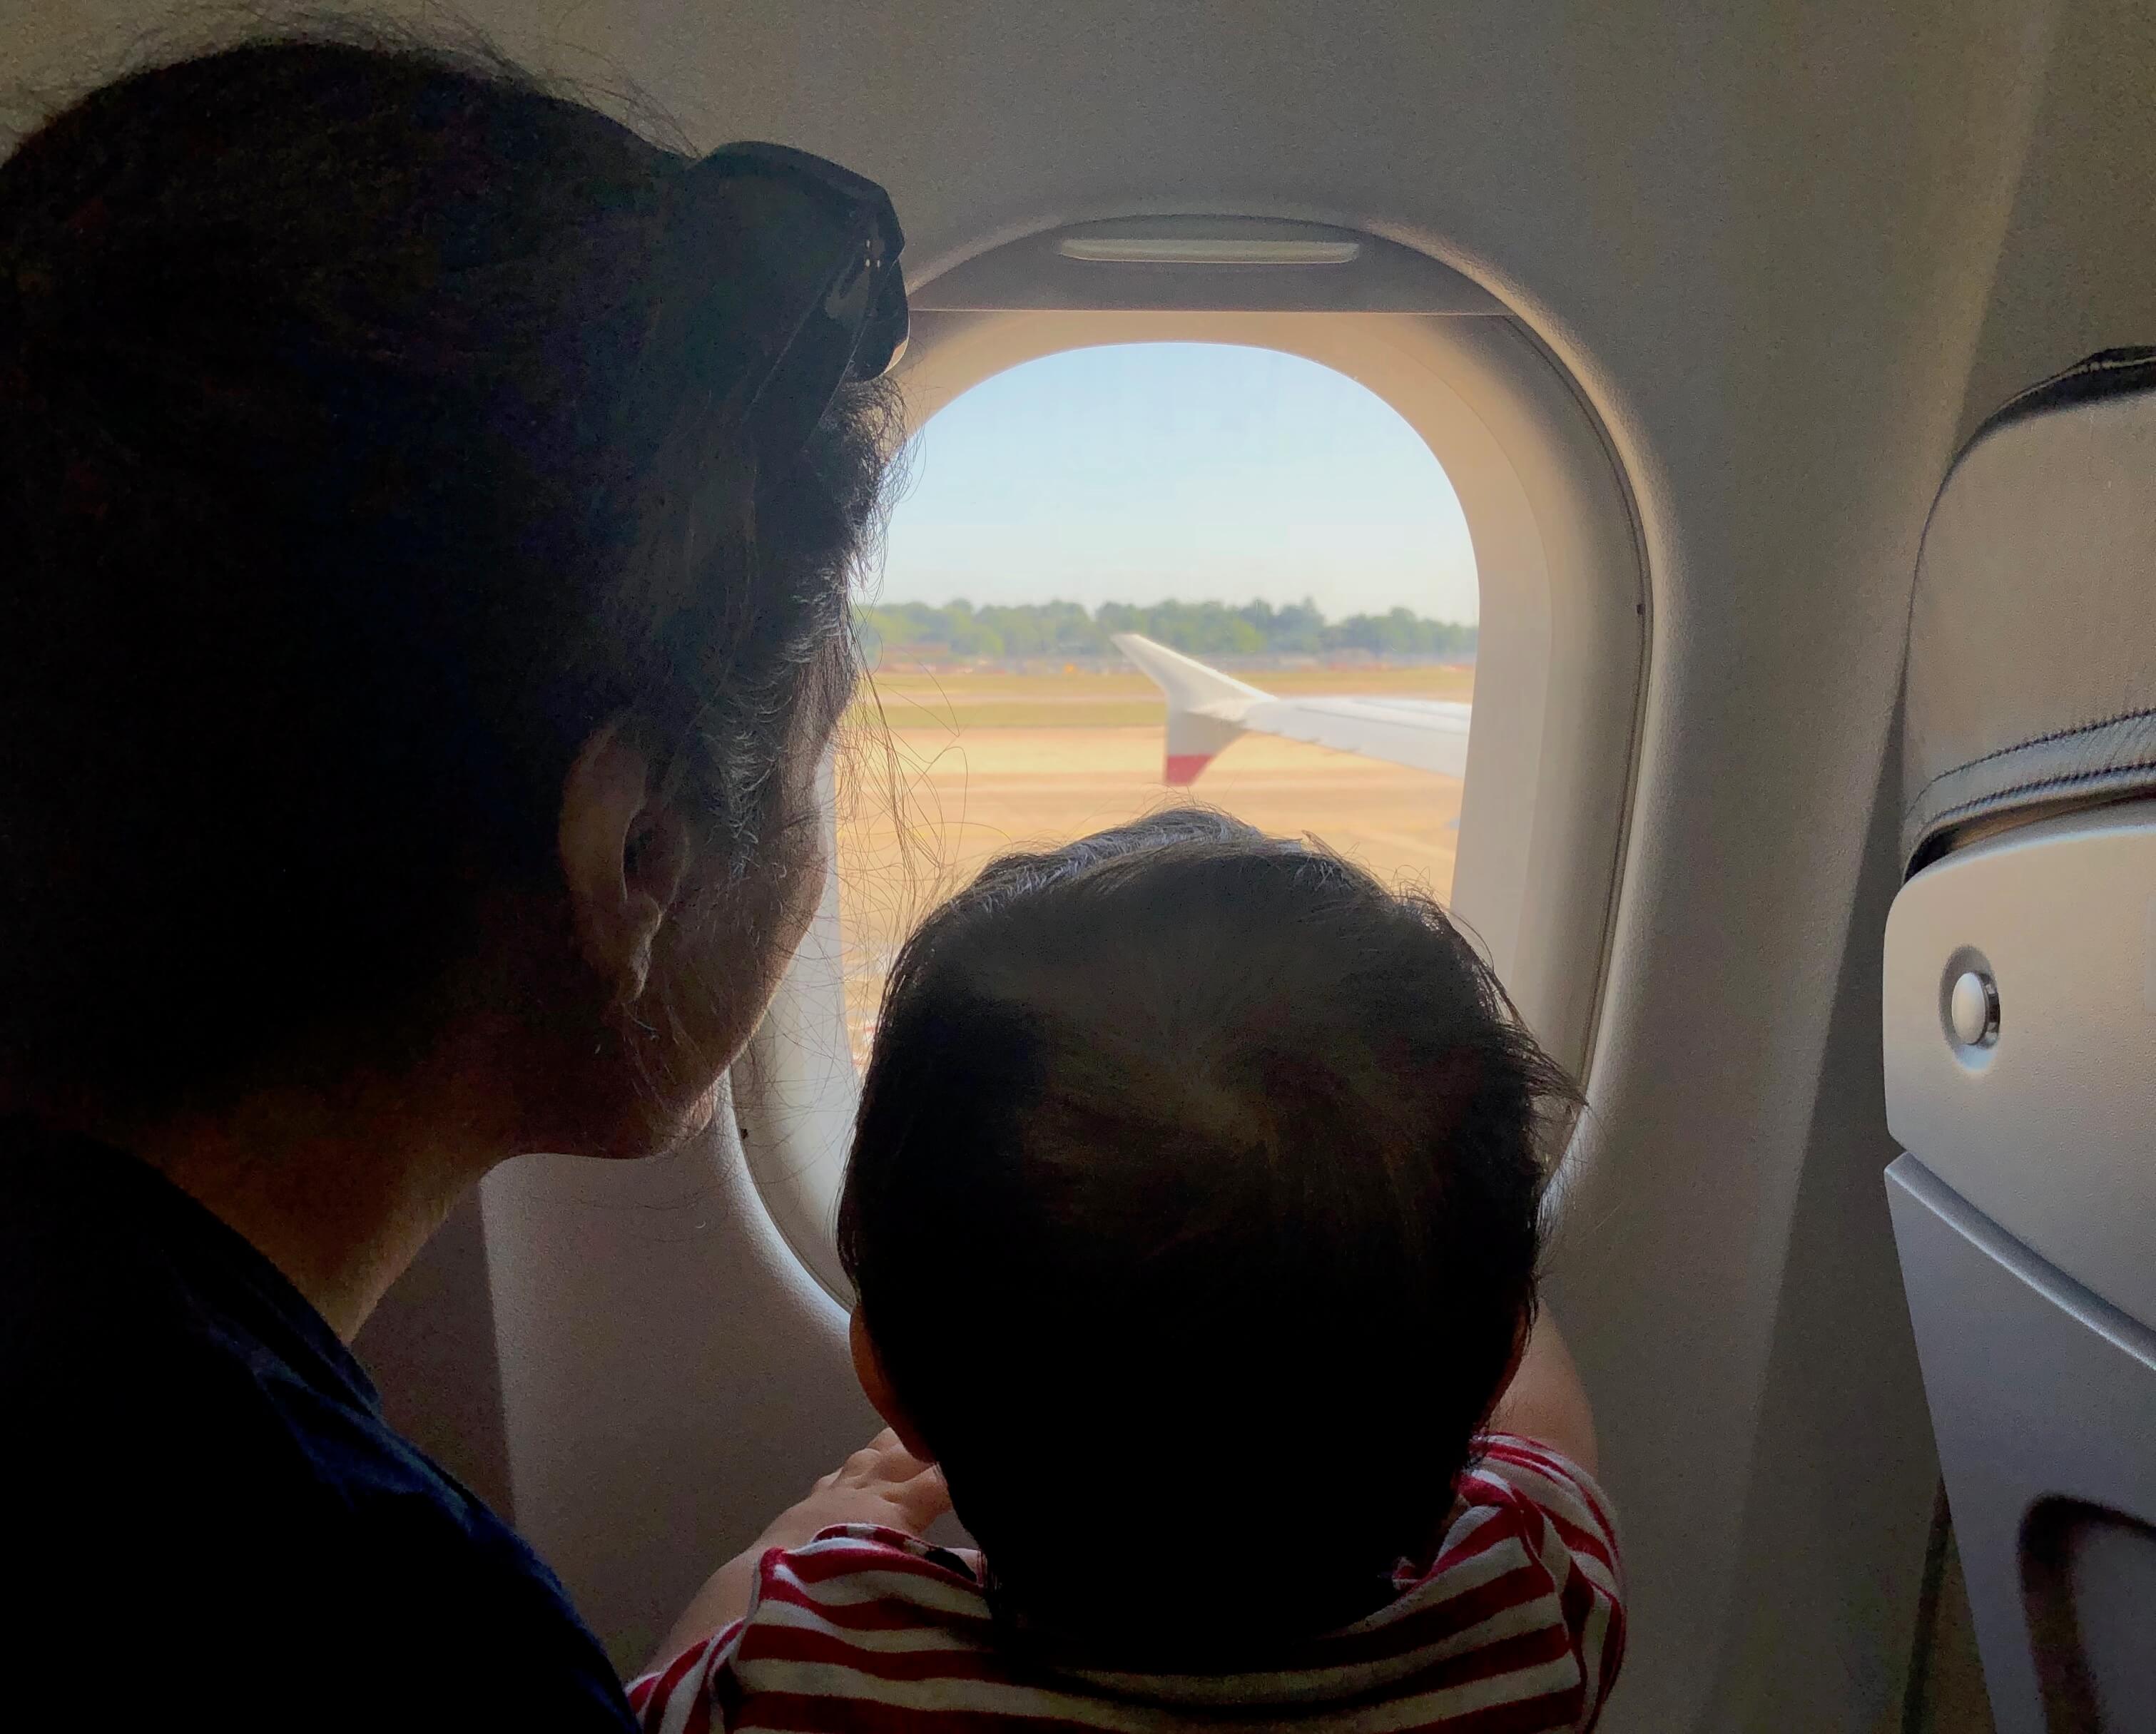 Expat Flyer family en route to Bordeaux on an Avios redemption with British Airways